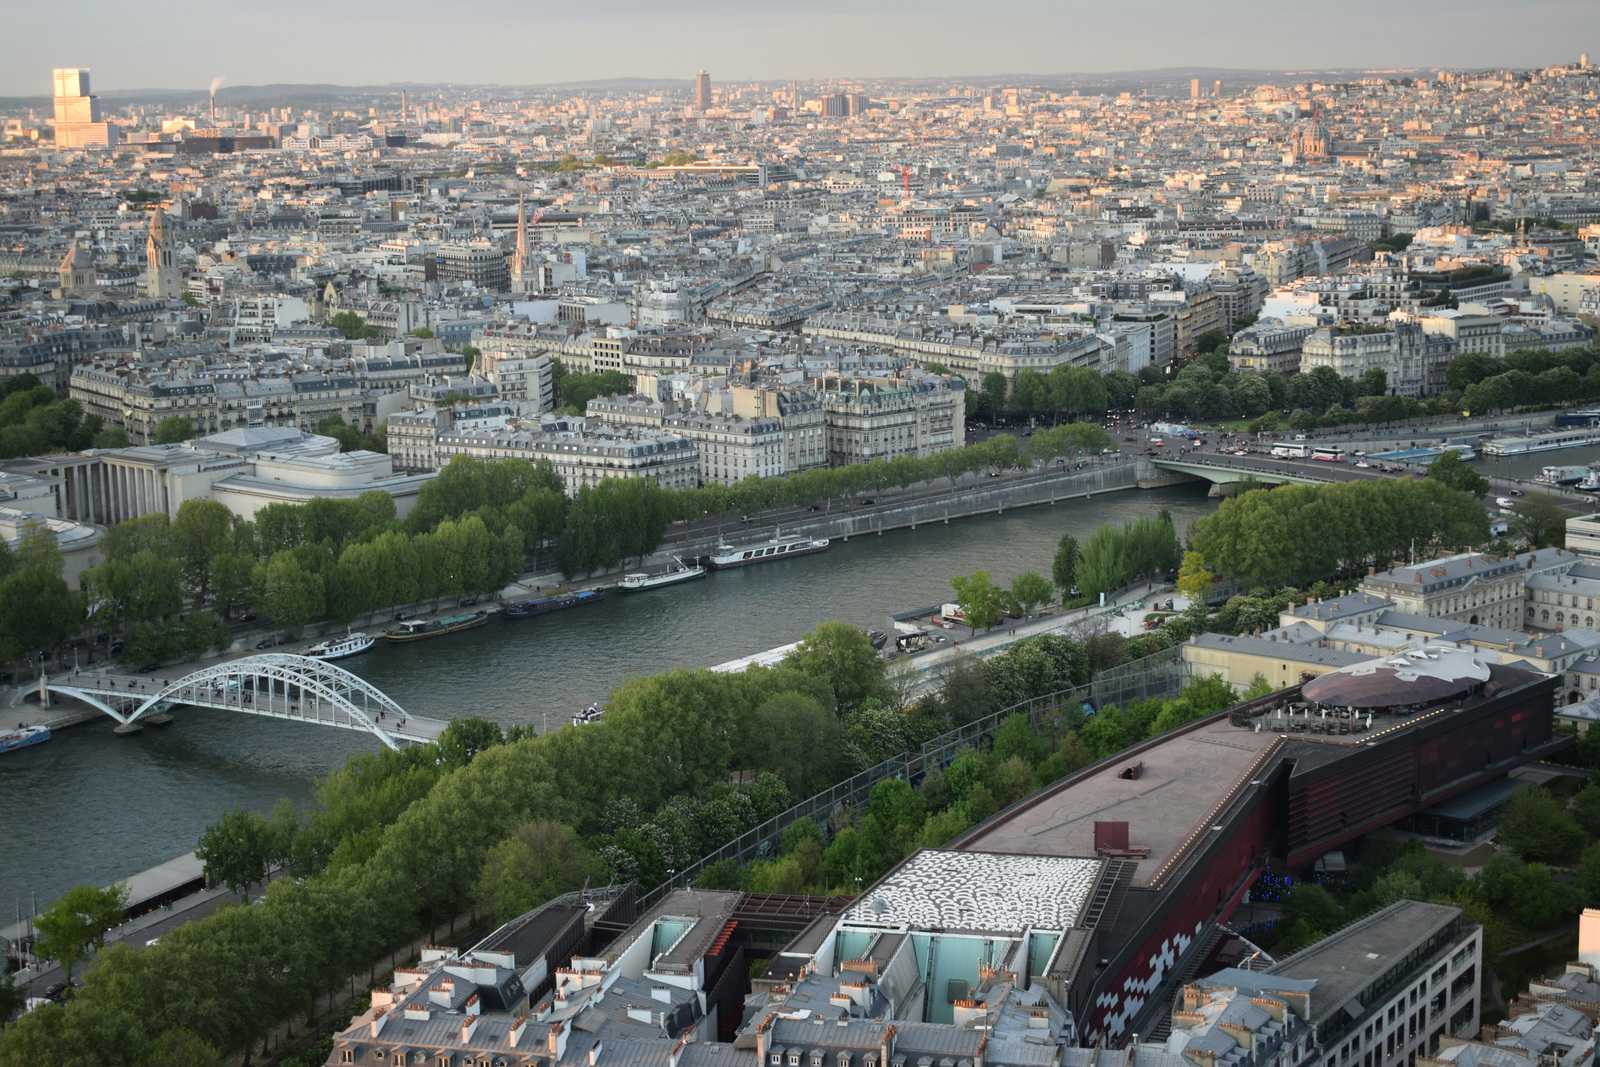 Seine River Cruise for Groups - The Perfect Group Activity in Paris